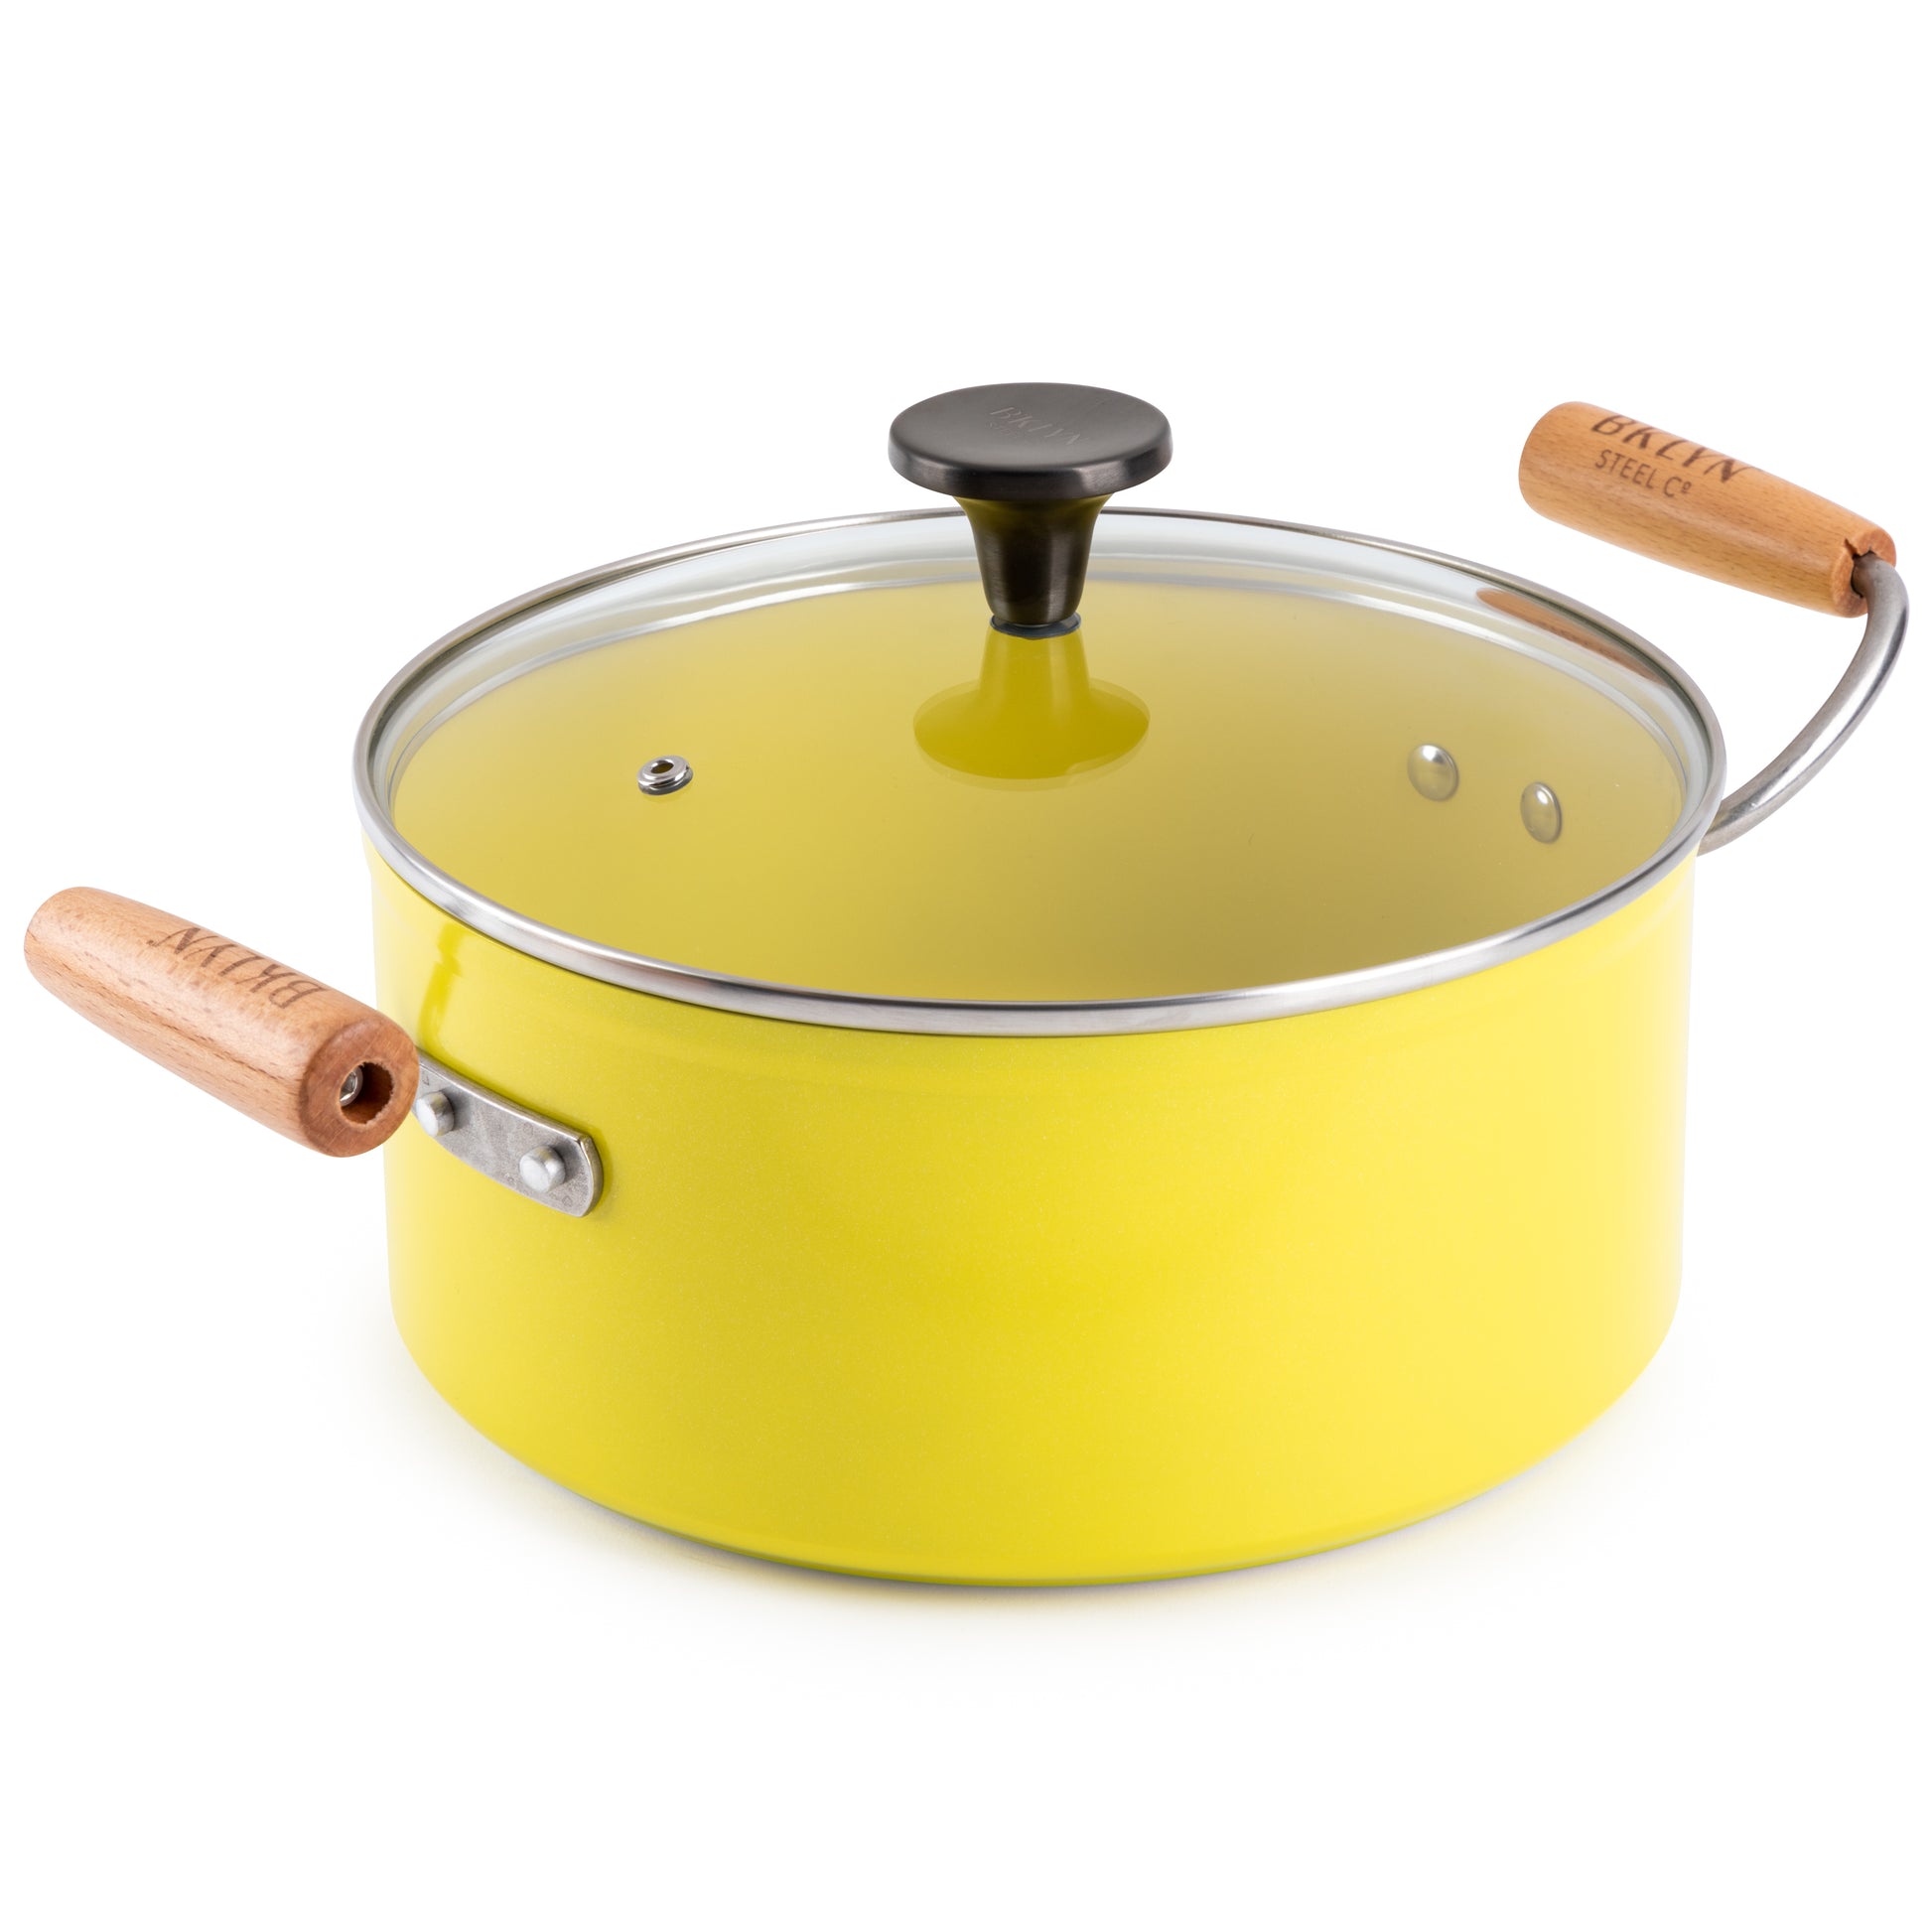 Yellow dutch oven with beachwood handles and a vented glass ild